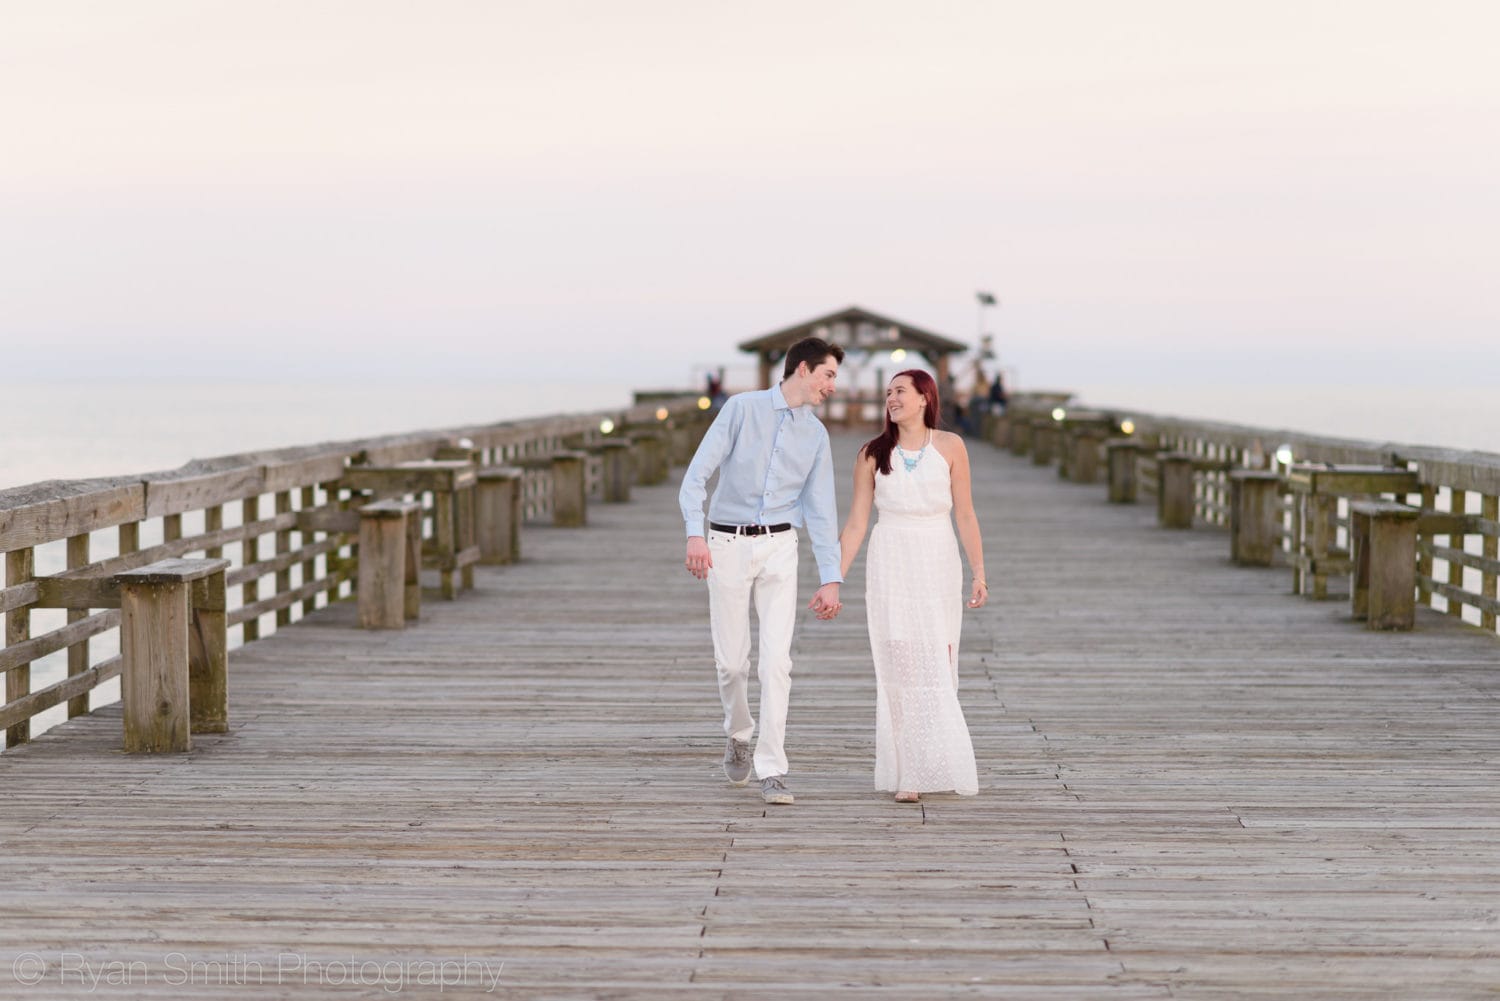 Holding hands walking down the pier - Myrtle Beach State Park